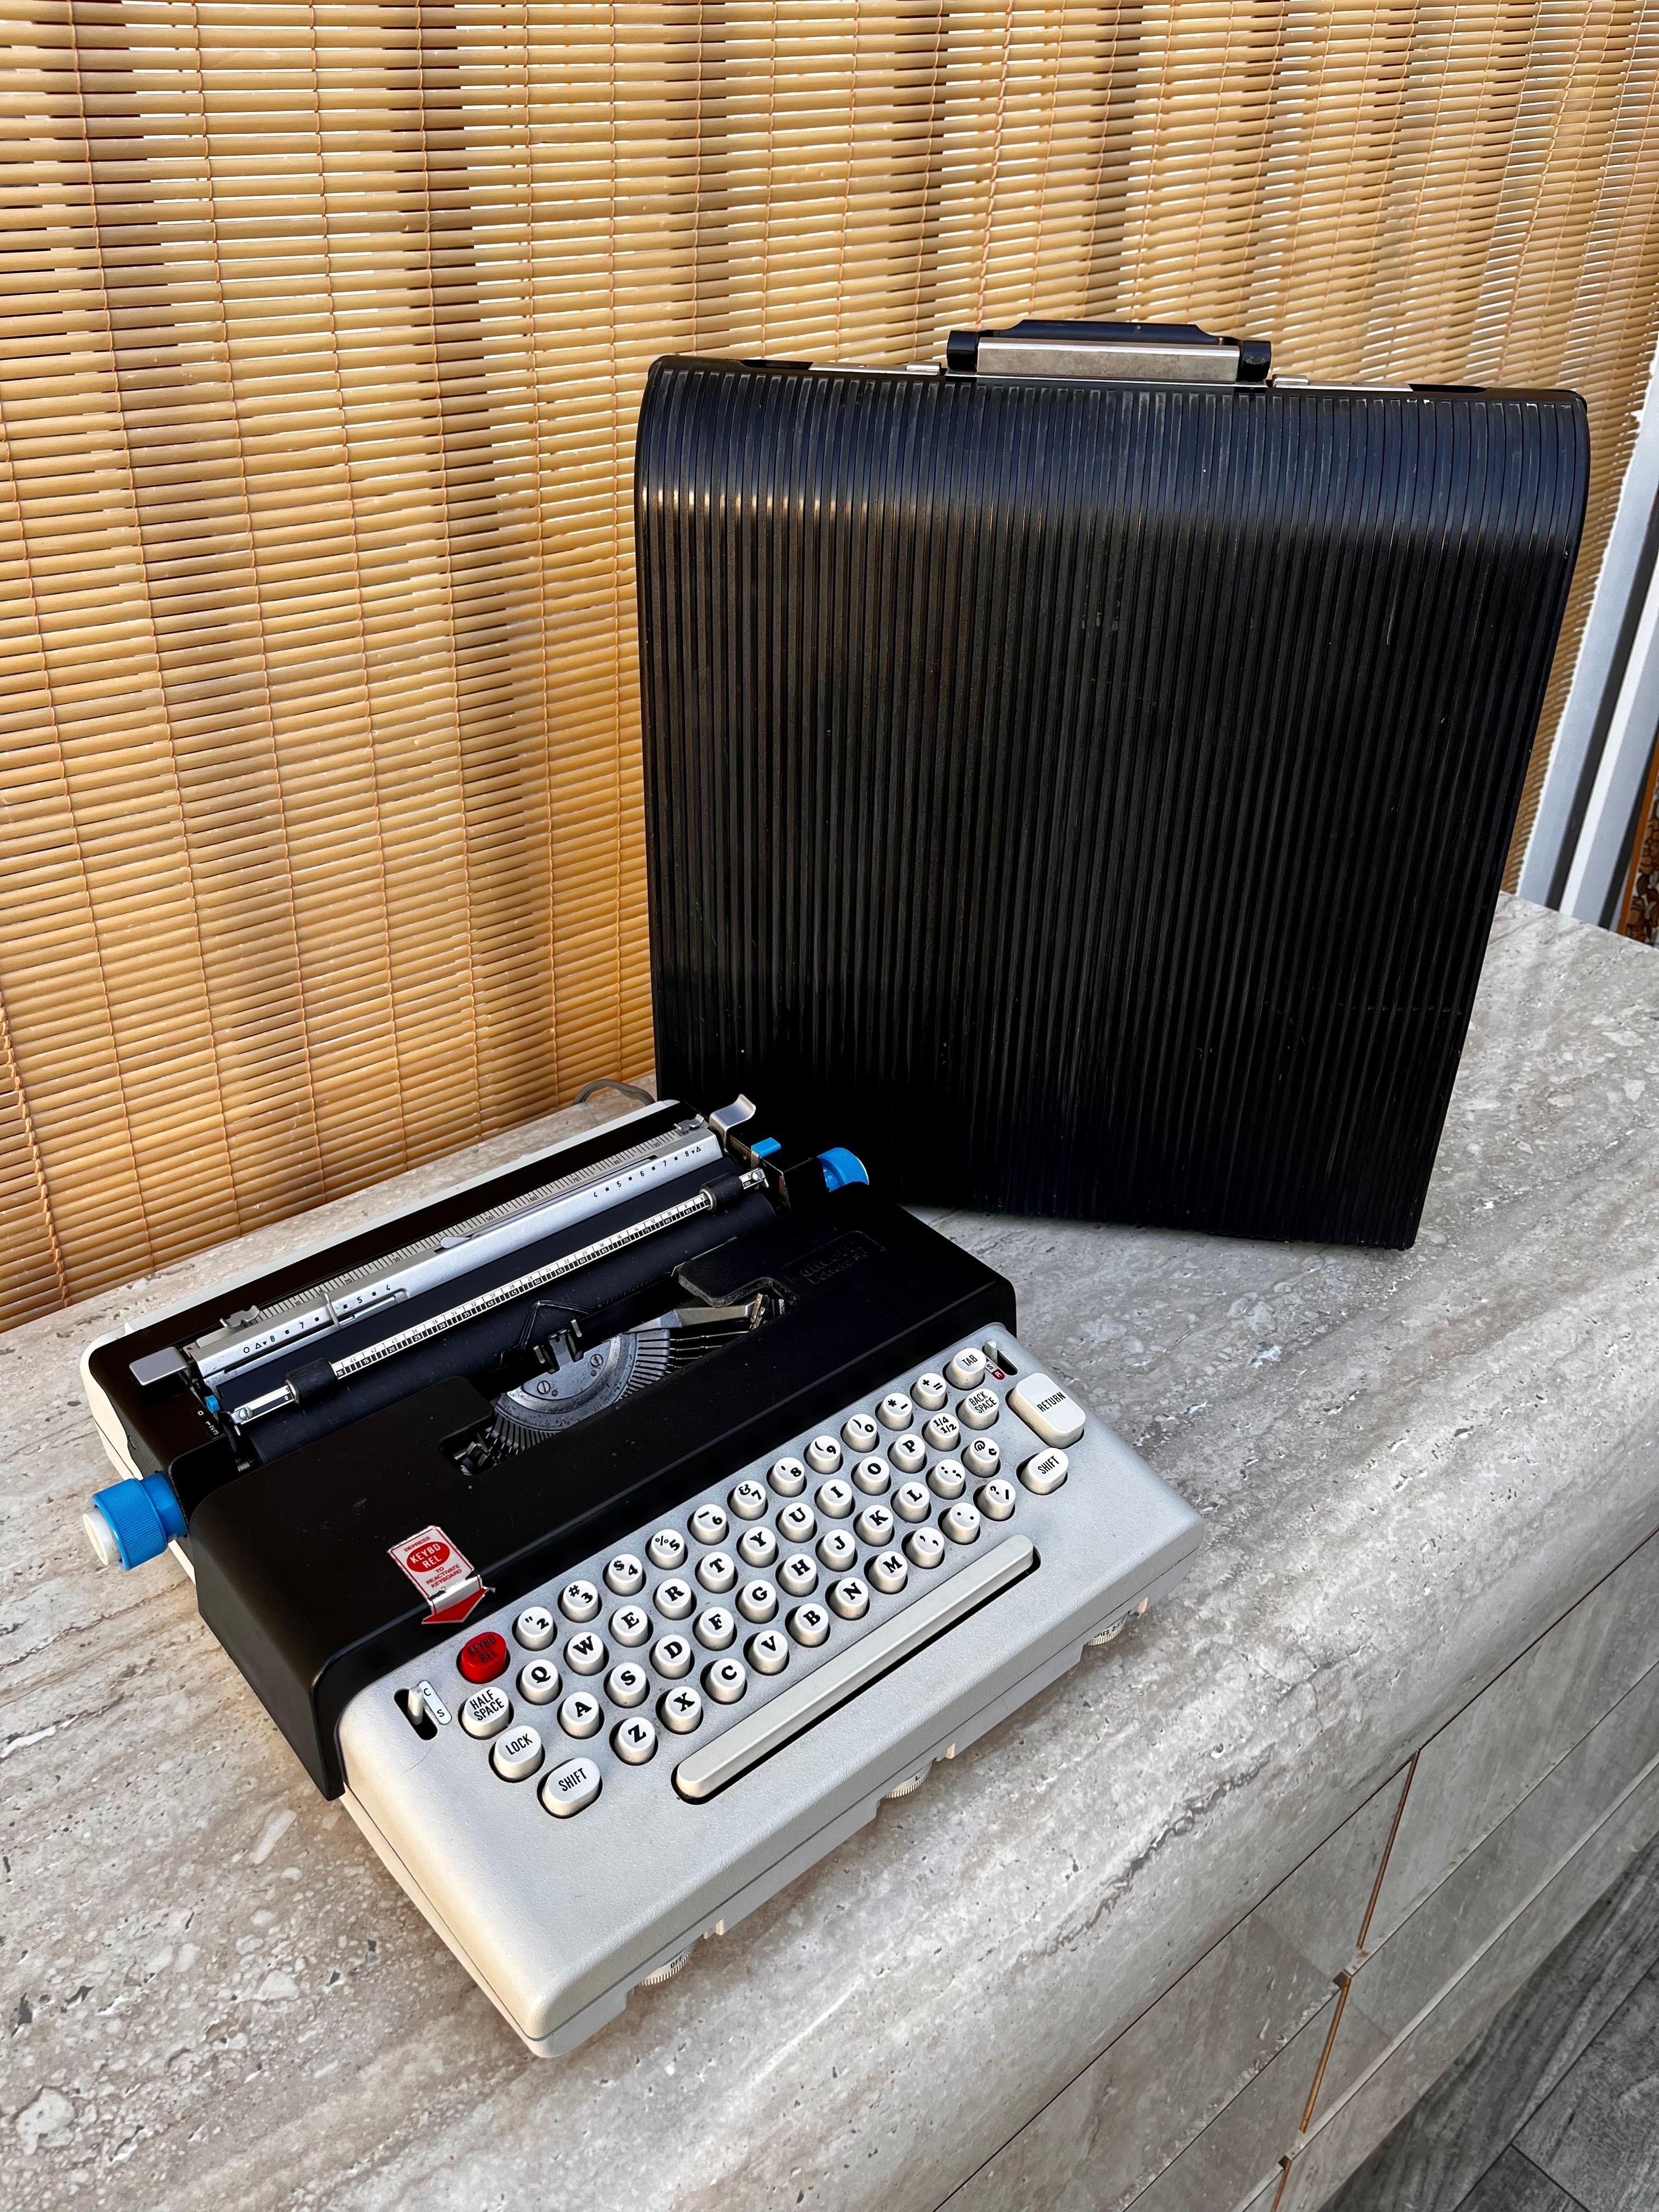 Vintage Olivetti Lettera 36 Portable Typewriter with the Original Case. circa early 1970s
Created by famed Italian designer/architect Ettore Sottsass, The Olivetti Lettera 36, was the Olivetti's first portable electric typewriter. 
Features a tidy